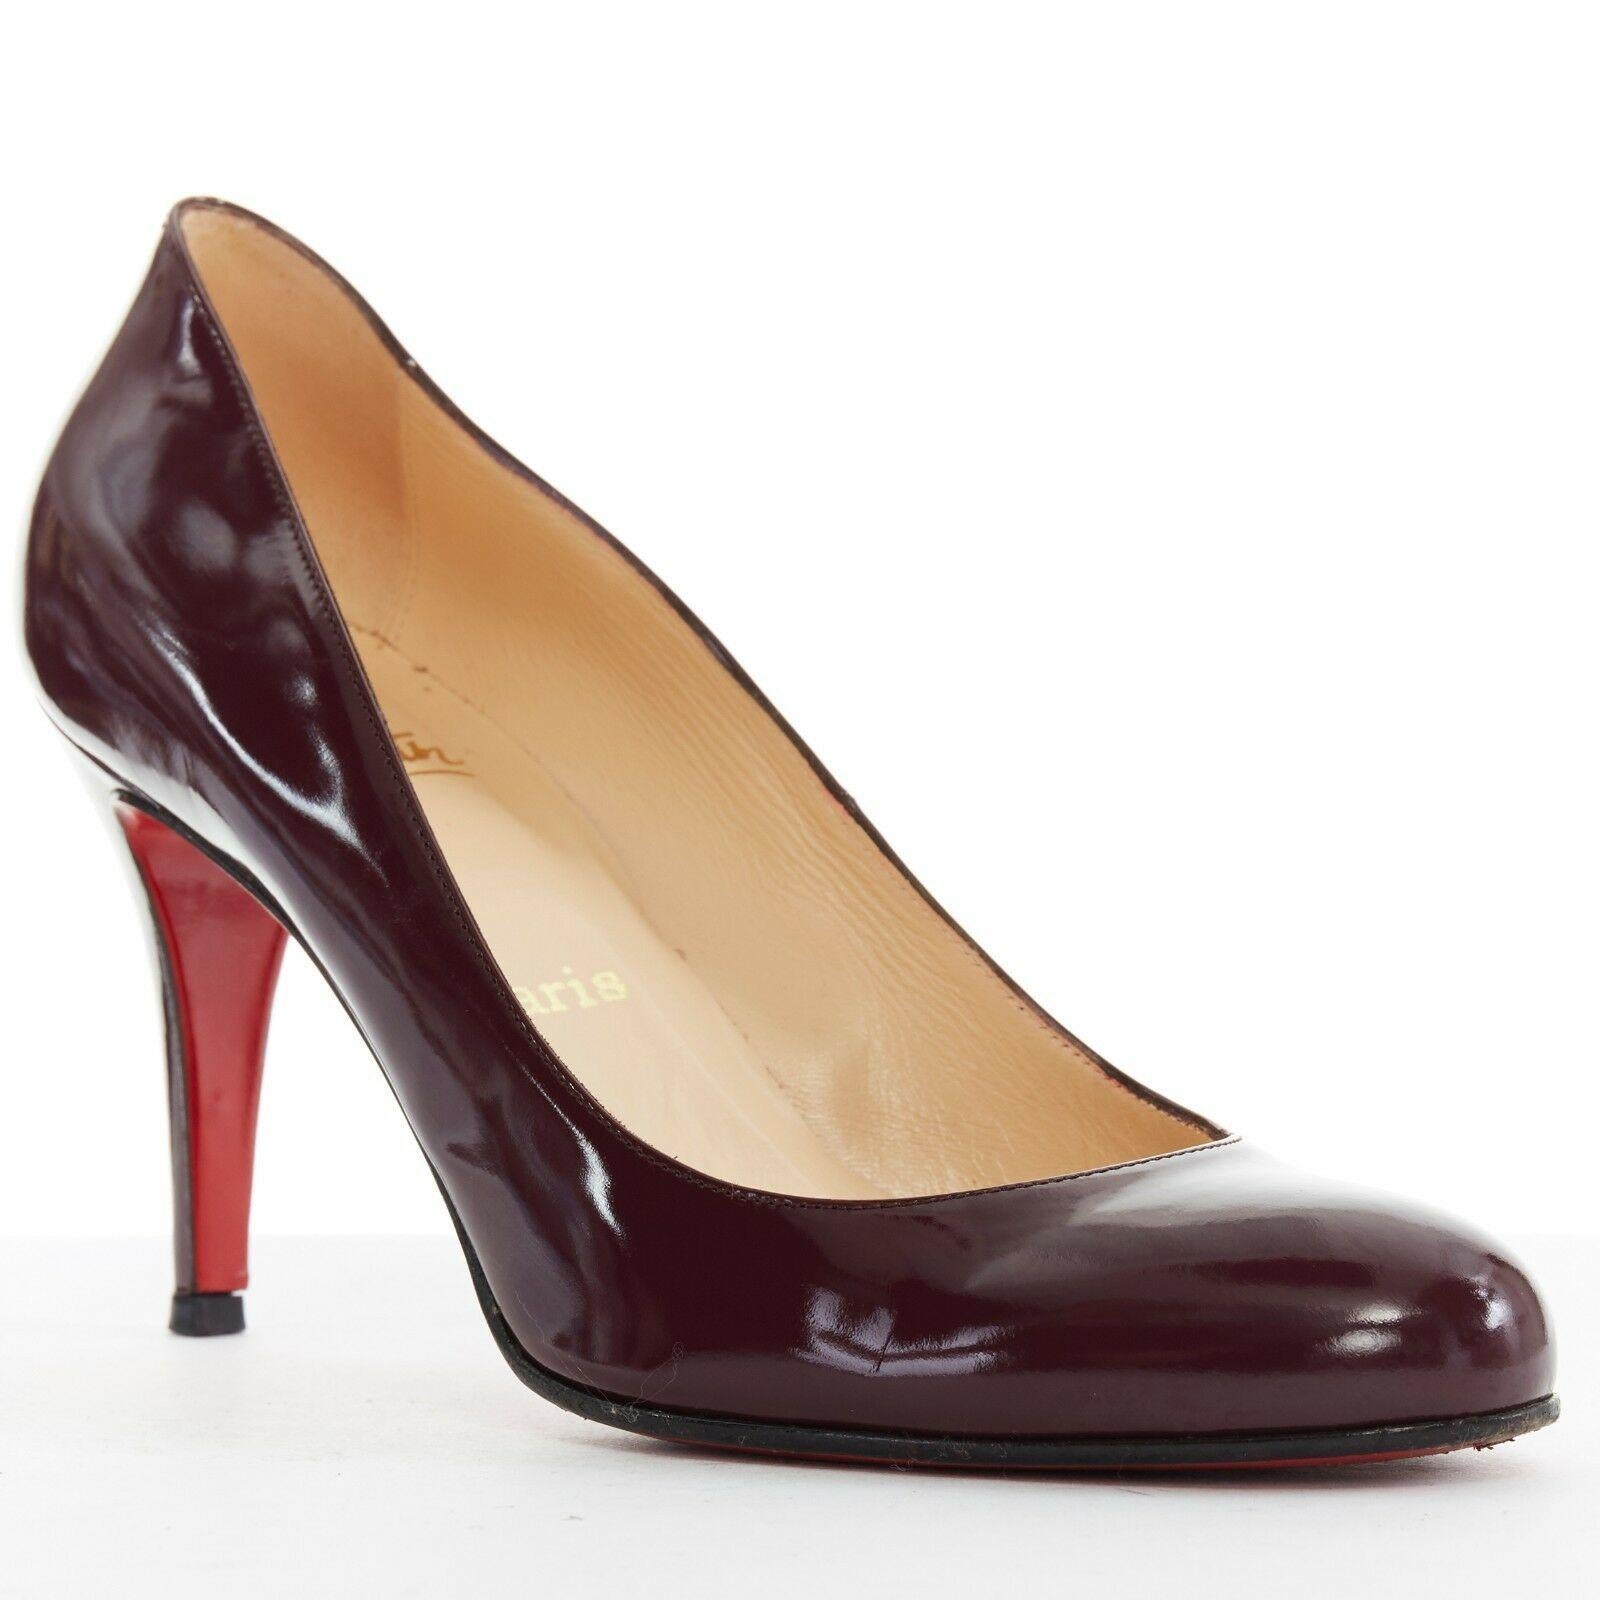 CHRISTIAN LOUBOUTIN Ron Ron 85 purple patent leather round toe pumps heel EU39.5
CHRISTIAN LOUBOUTIN
Ron Ron 85. dark purple leather upper. 
Round toe. Covered heel. Padded insole. 
Tan leather lining. Signature red lacquered sole. 
Made in